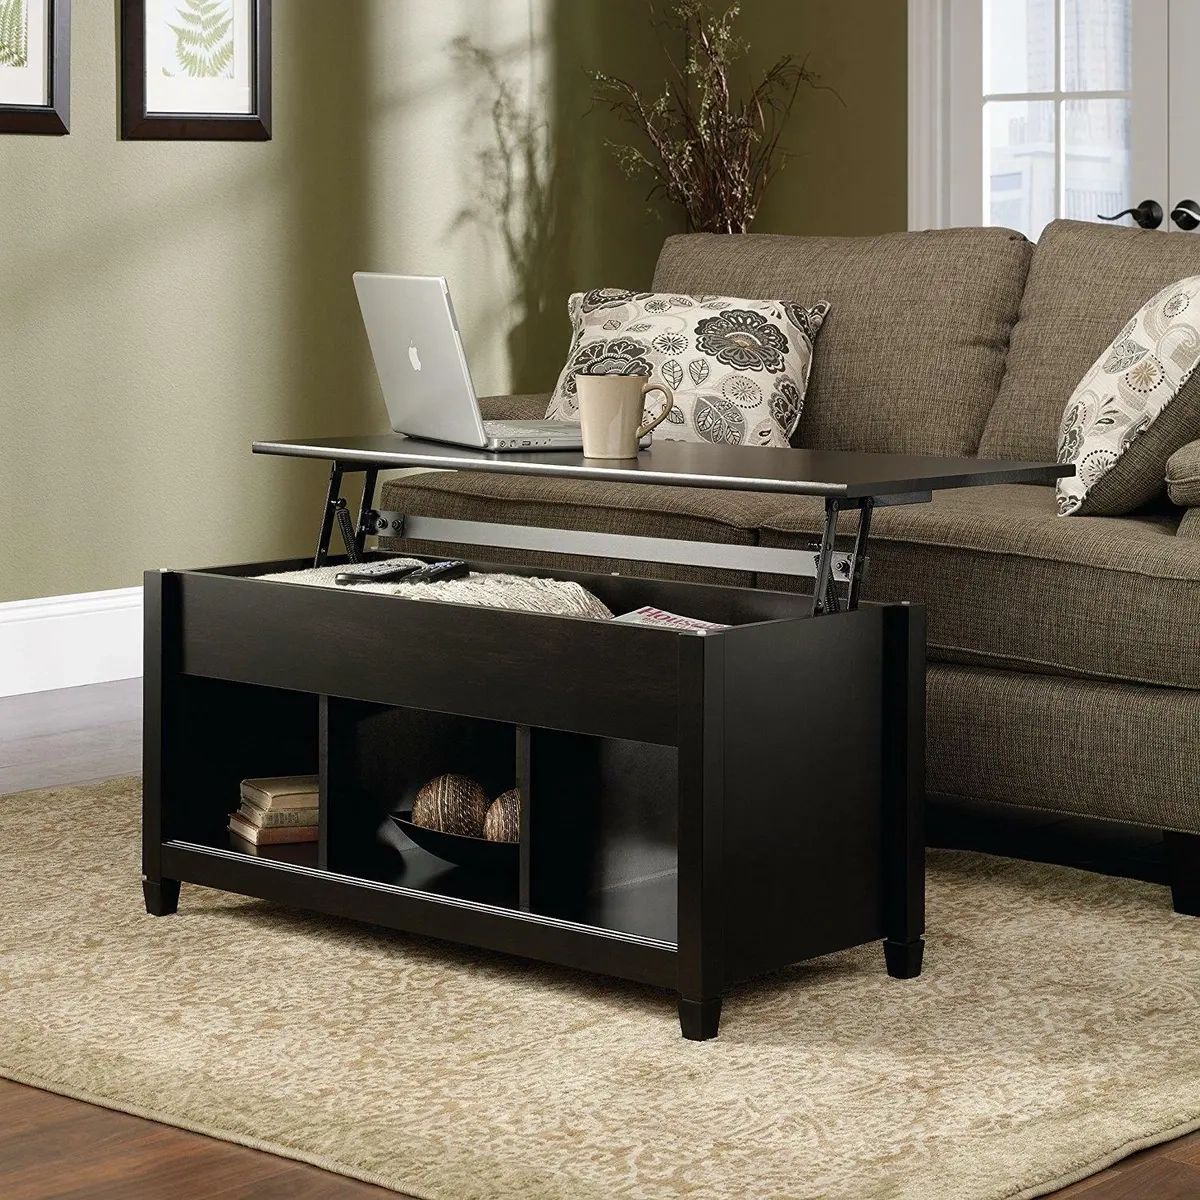 Lift Top Coffee Table Modern Furniture W/Hidden Storage Compartment & Shelf  | Ebay Intended For Modern Coffee Tables With Hidden Storage Compartments (Photo 2 of 15)